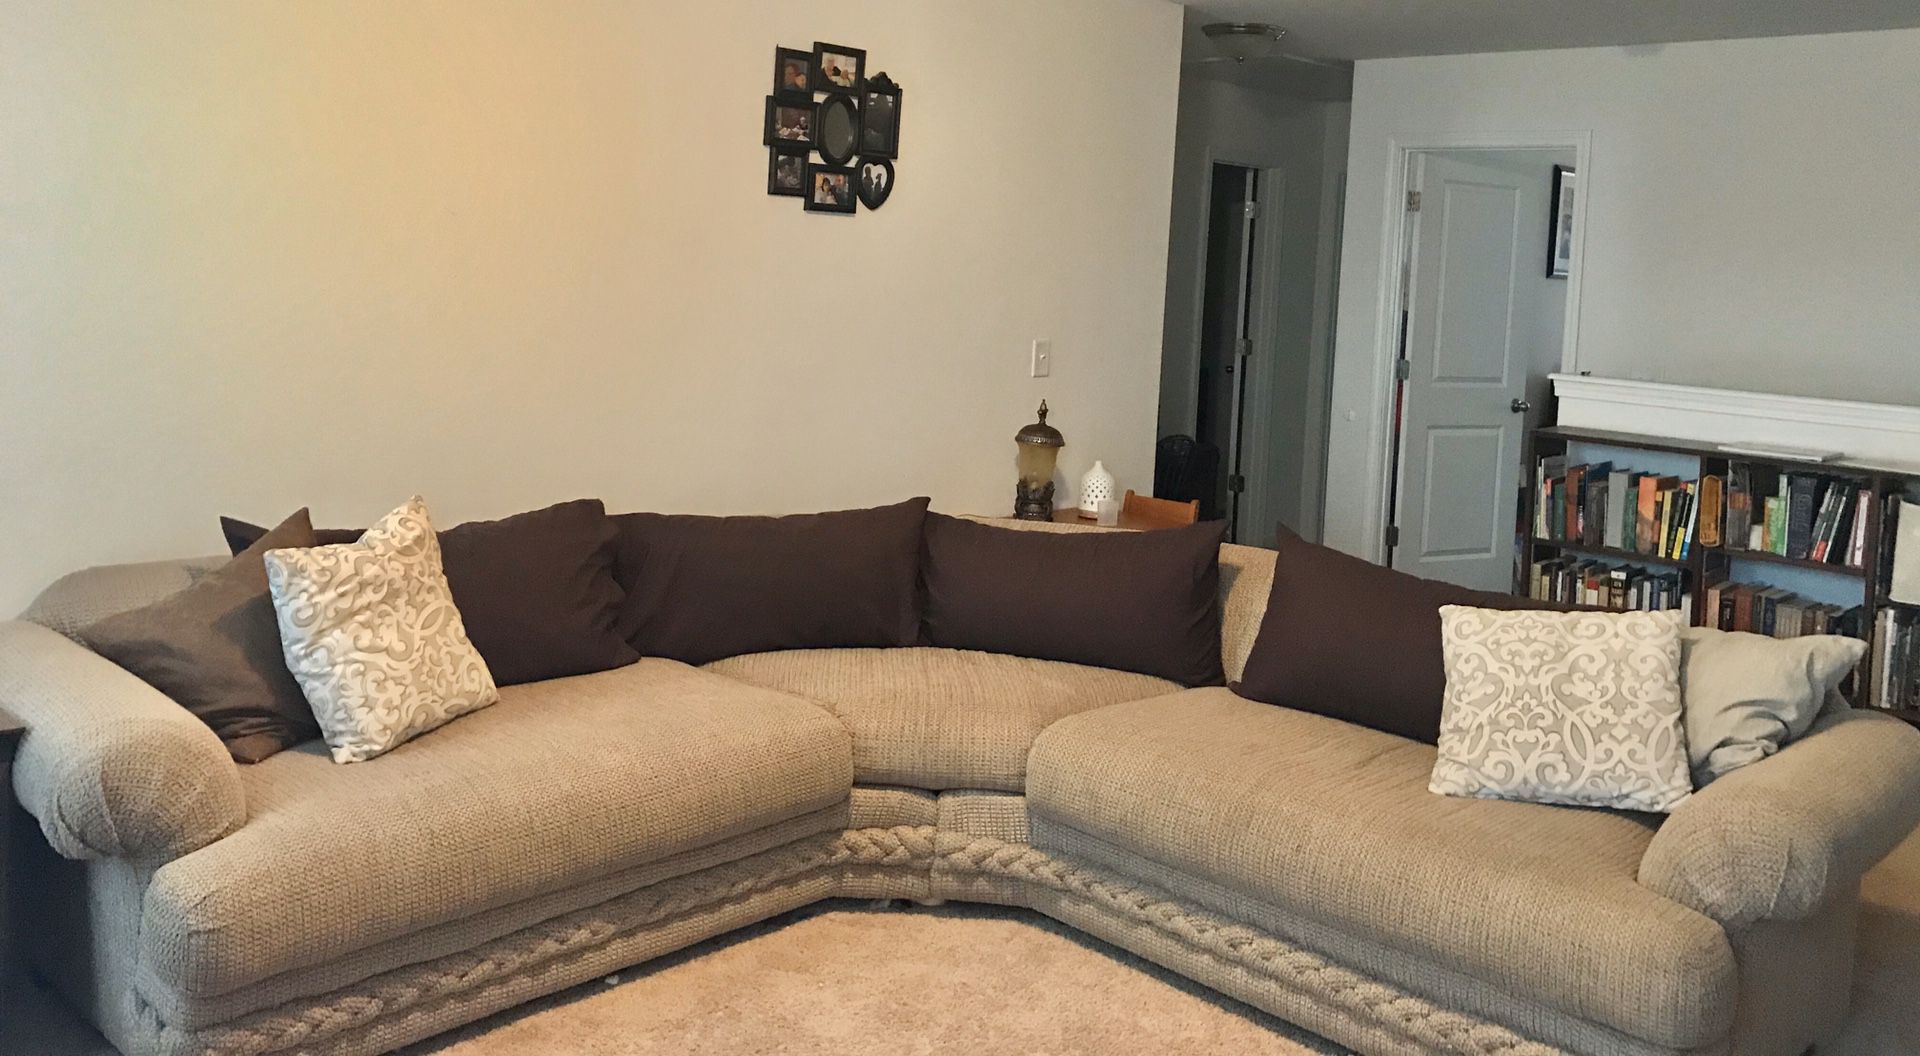 Haverty’s Two-Piece Sectional Sofa